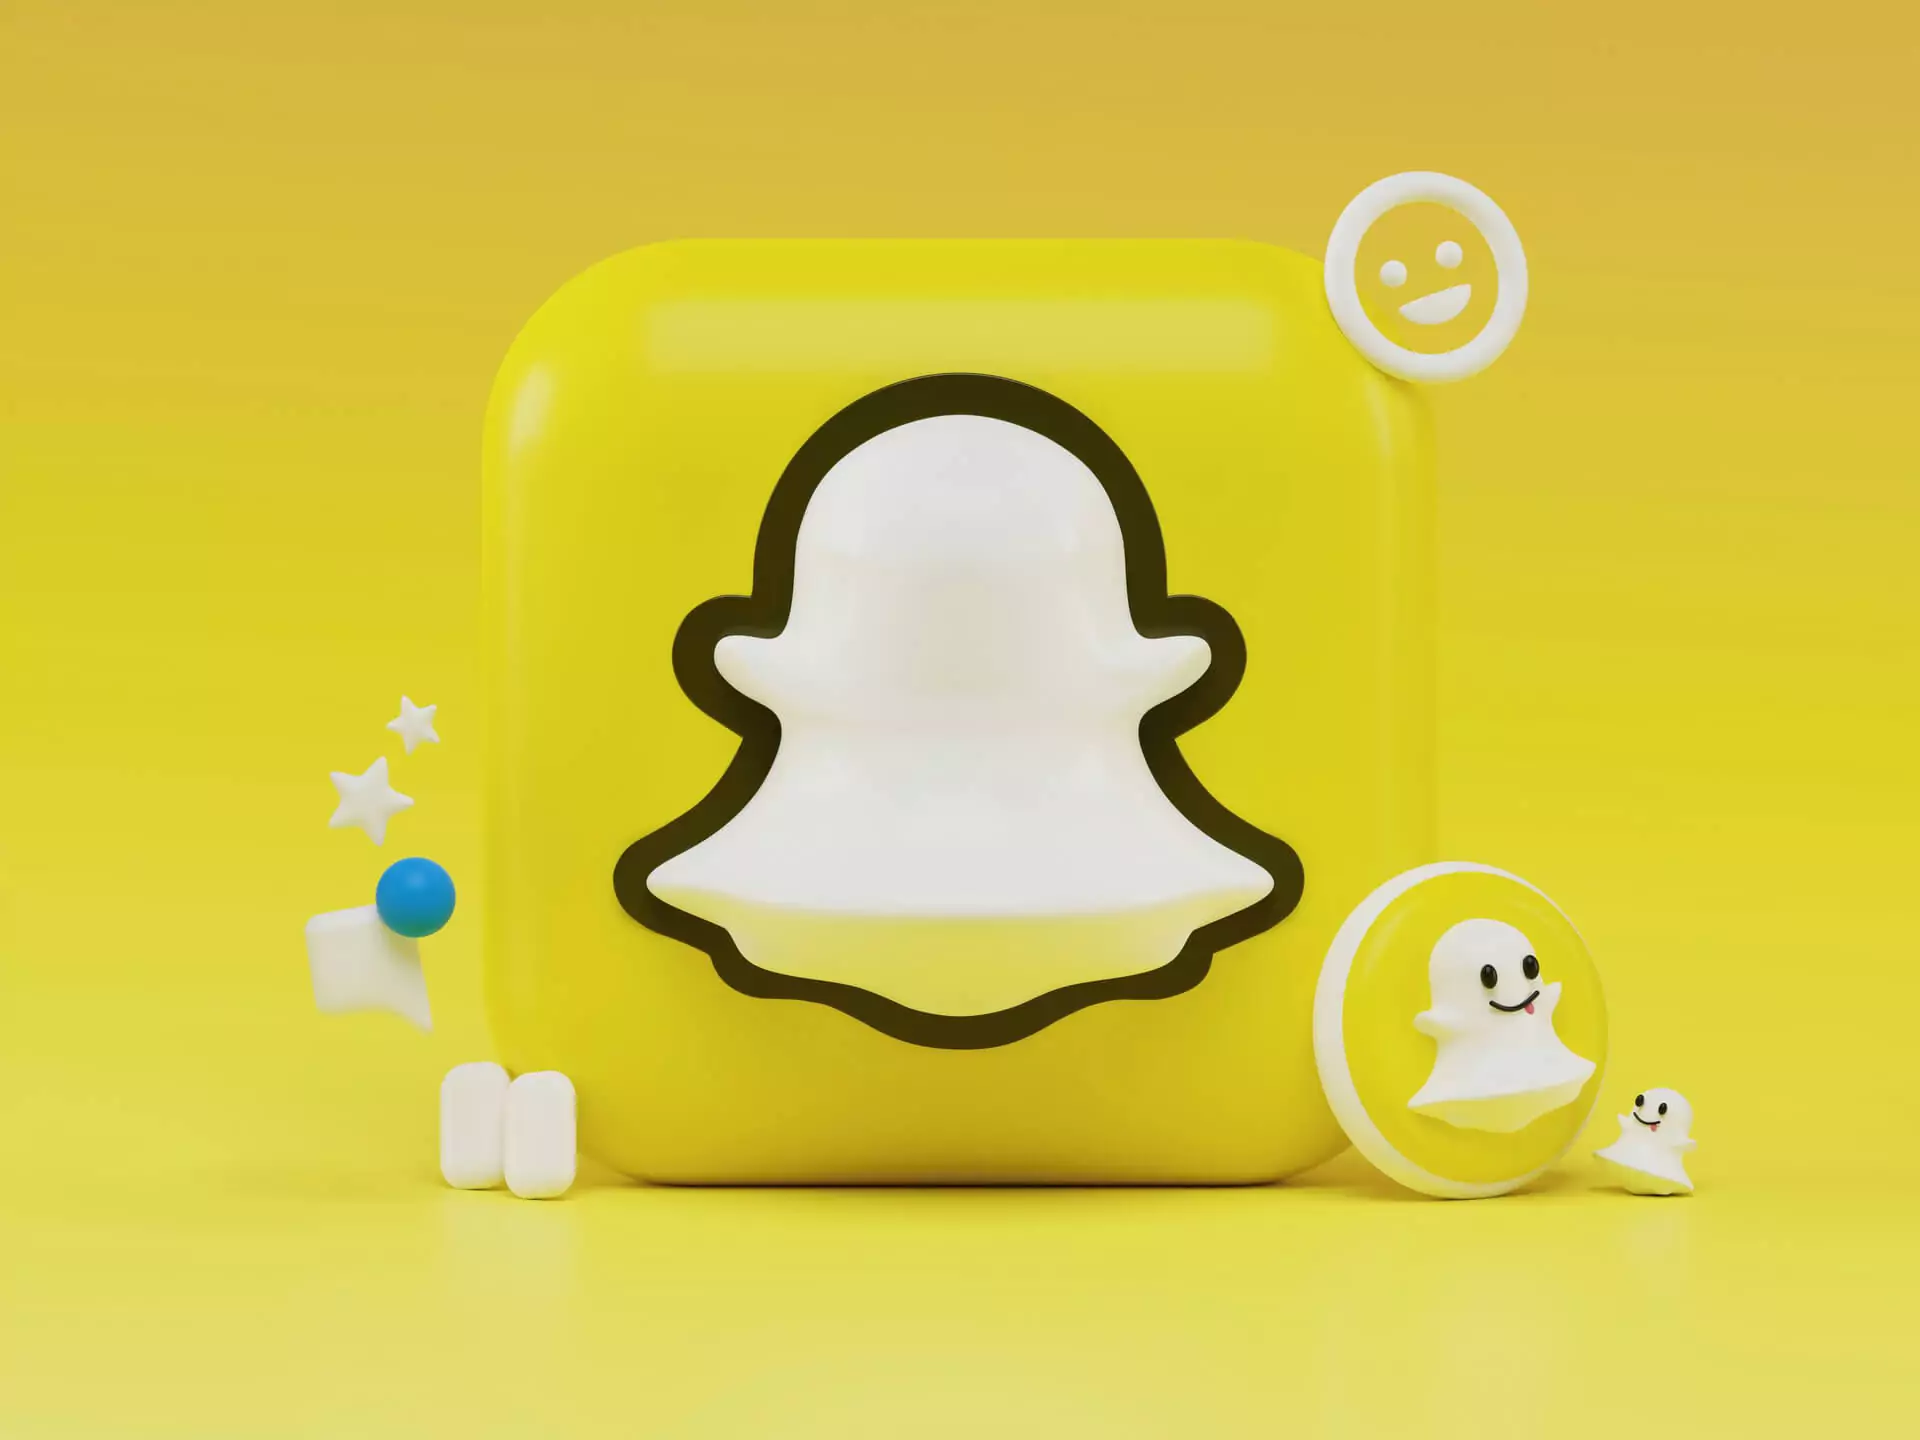 The Snapcode Feature of SnapChat